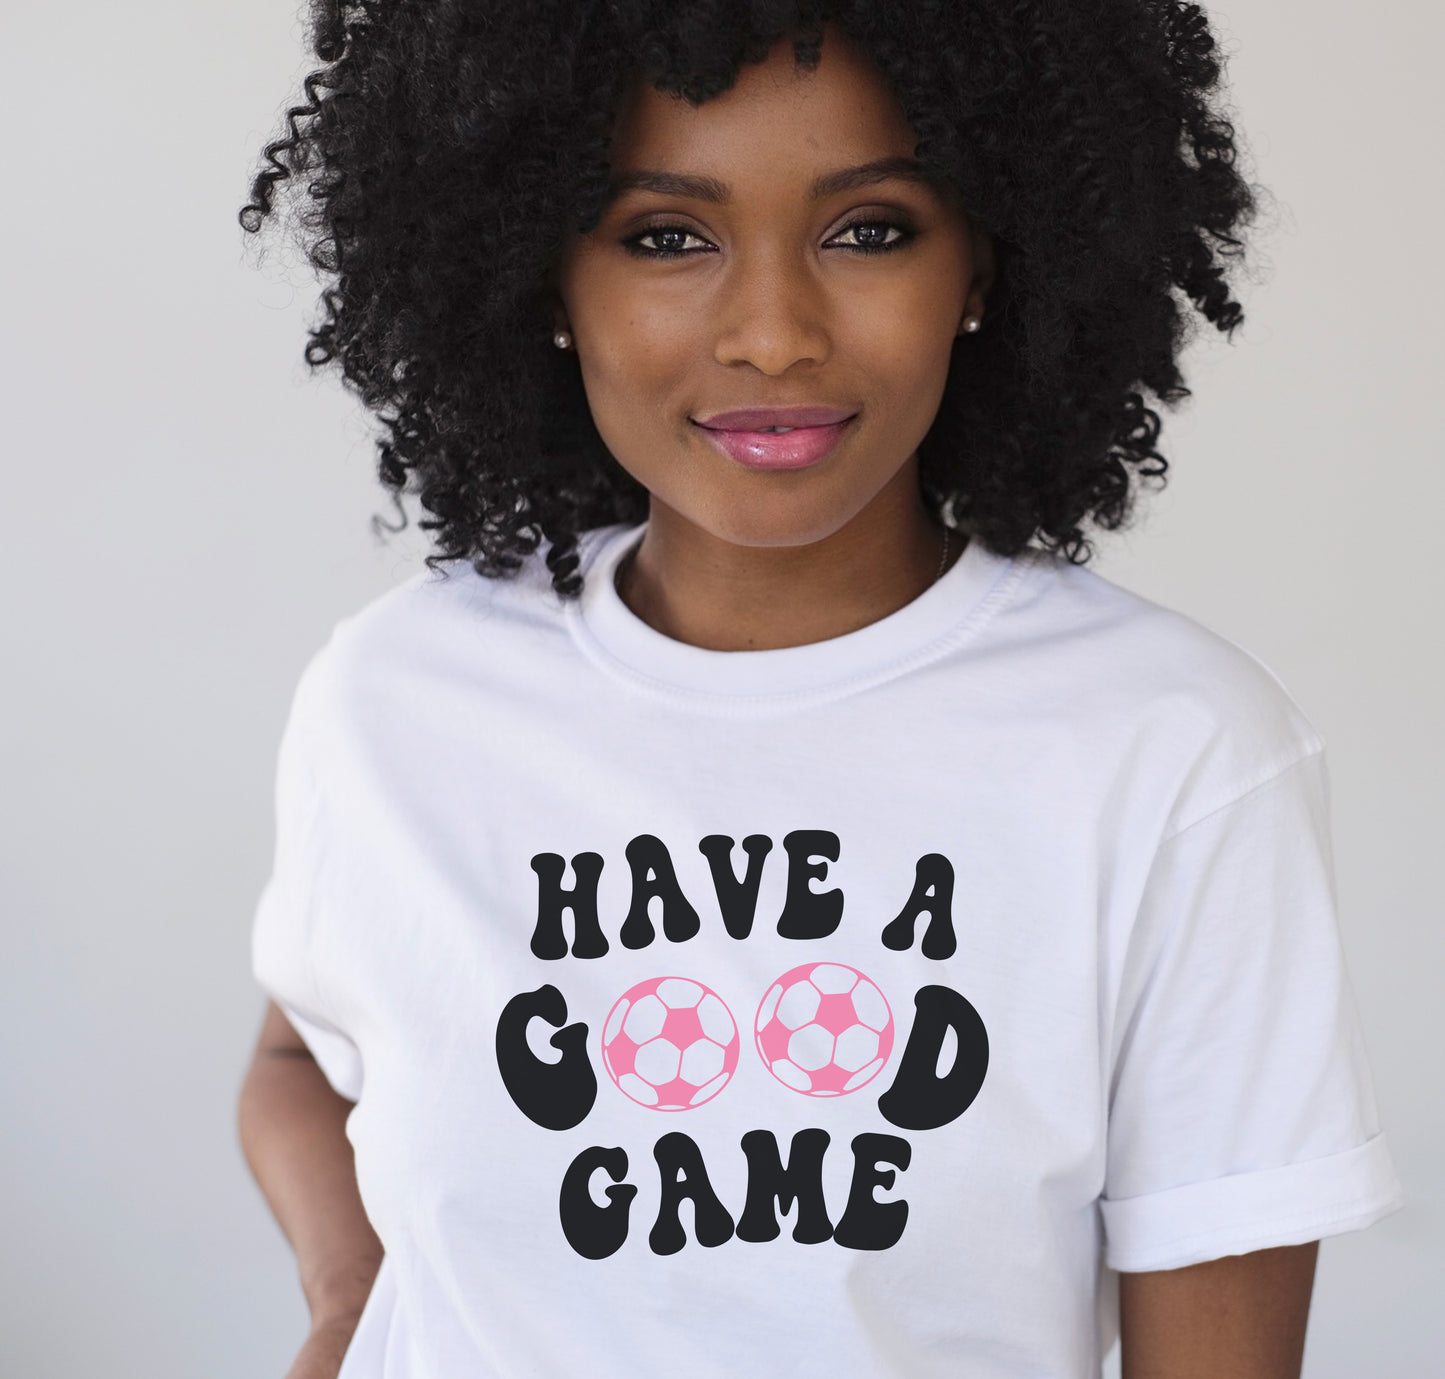 Have a Good Game T-Shirt